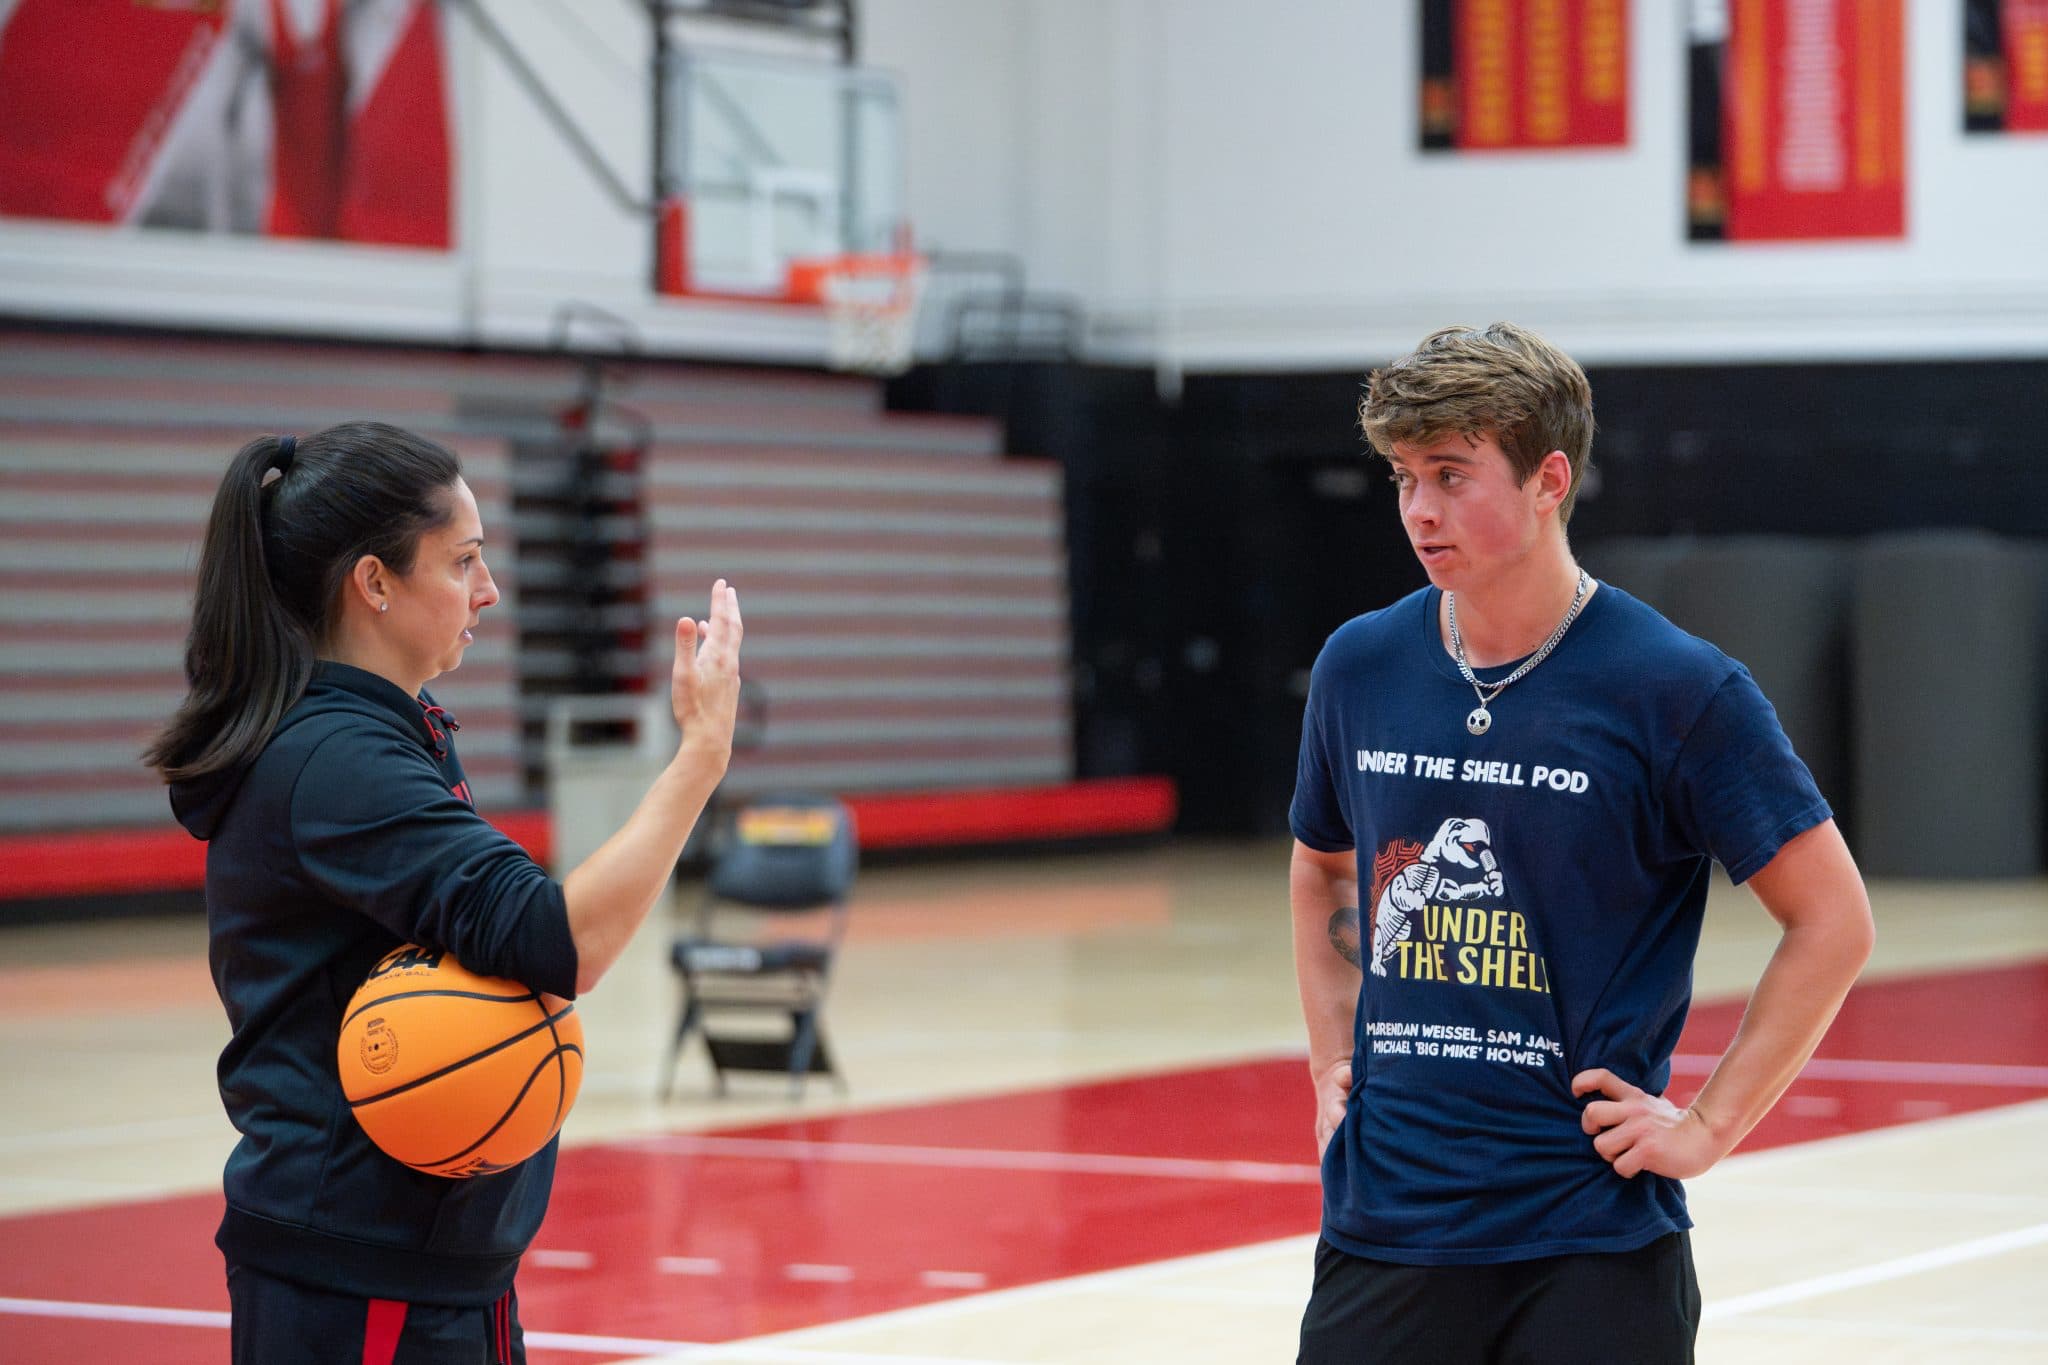 Sam Jane ’26 walking through drill instructions with Maryland women's basketball's assistant coach Jessica Imhof.